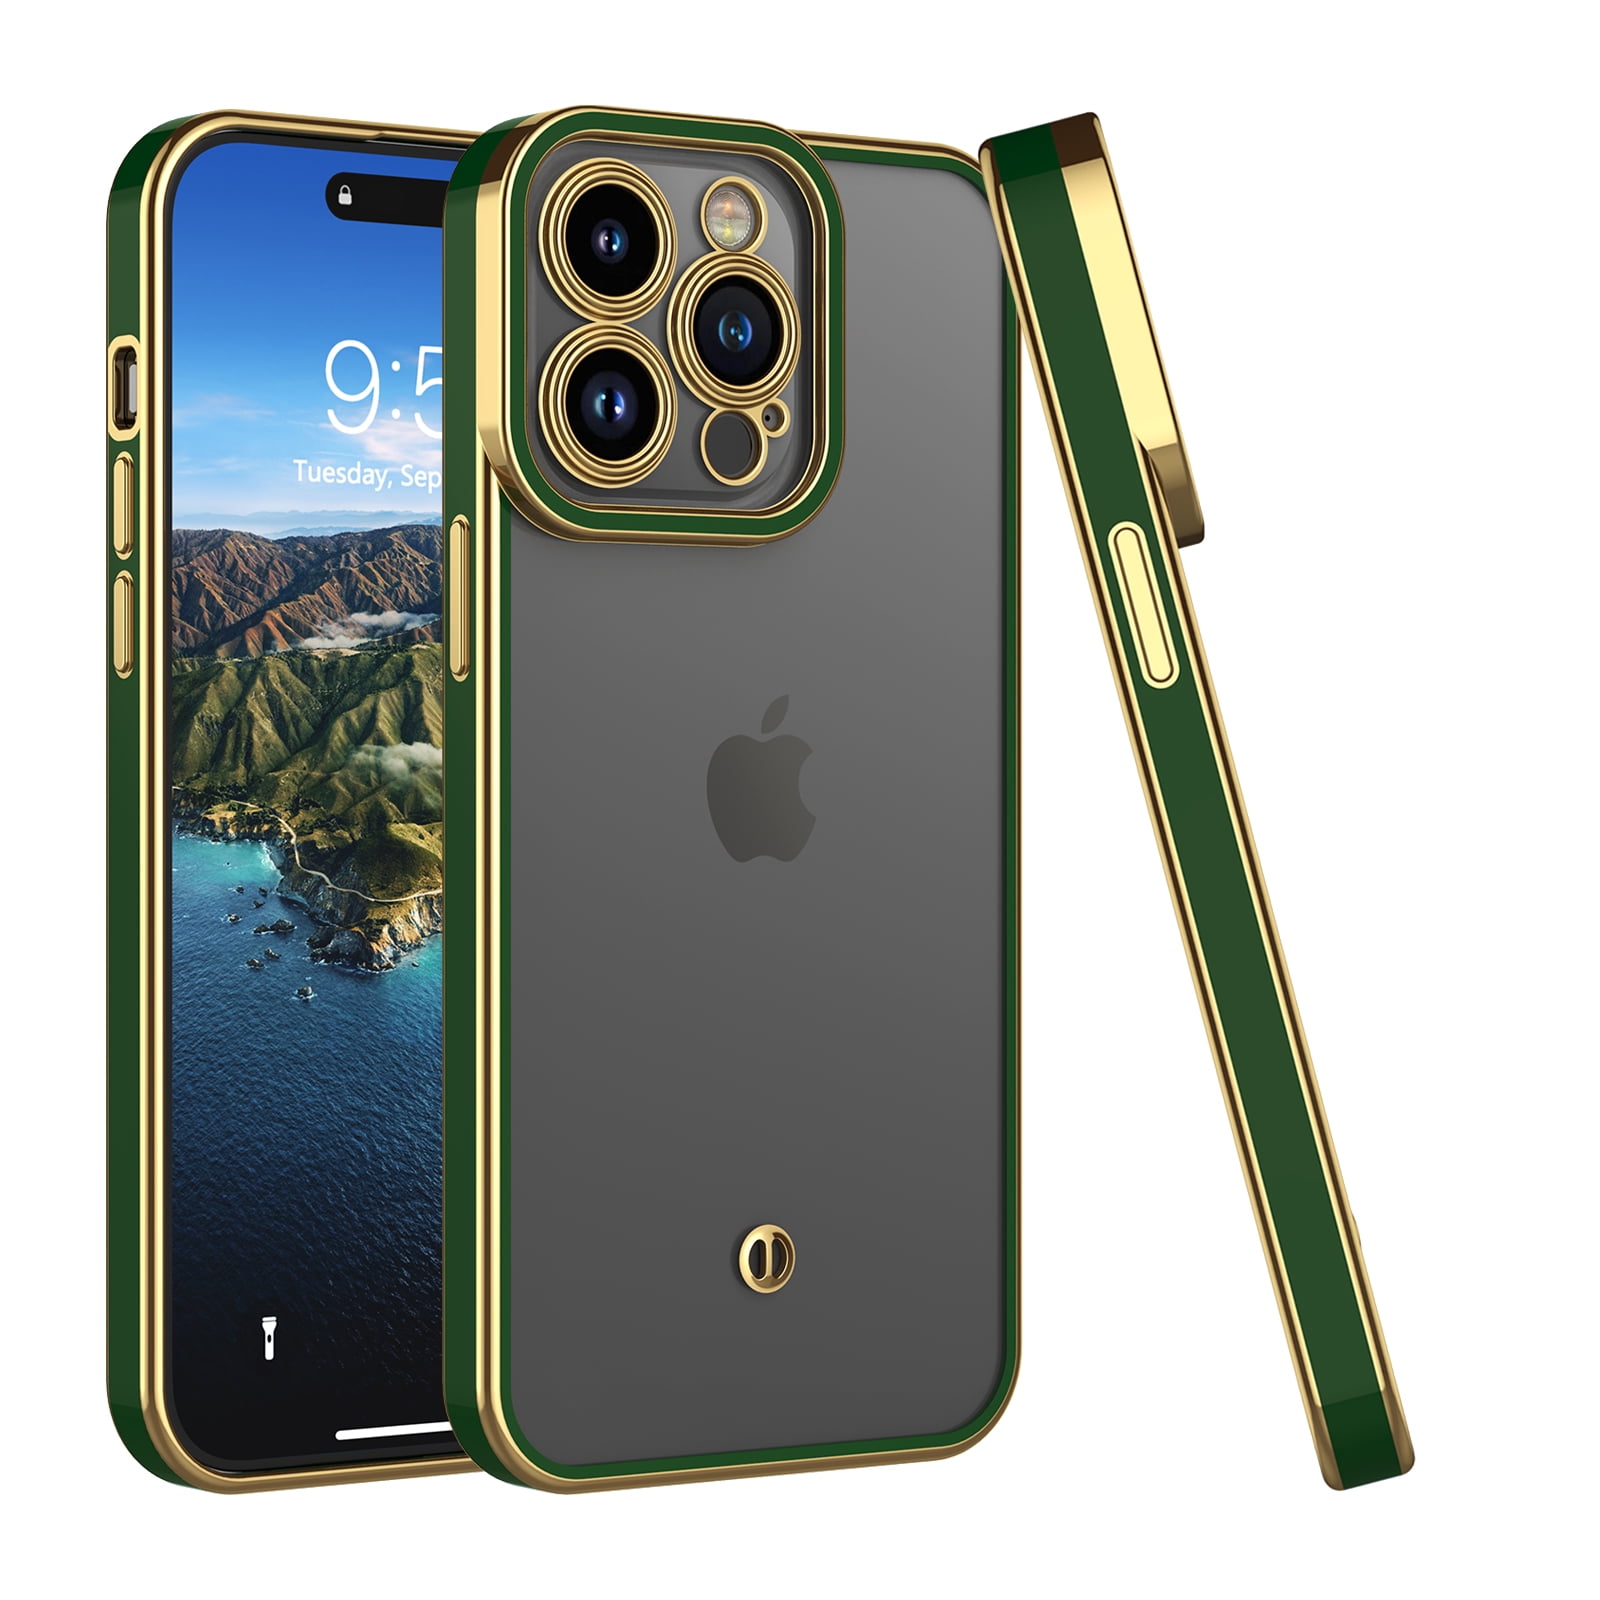 The Z-Connector iPhone Case (with Chain!) Review